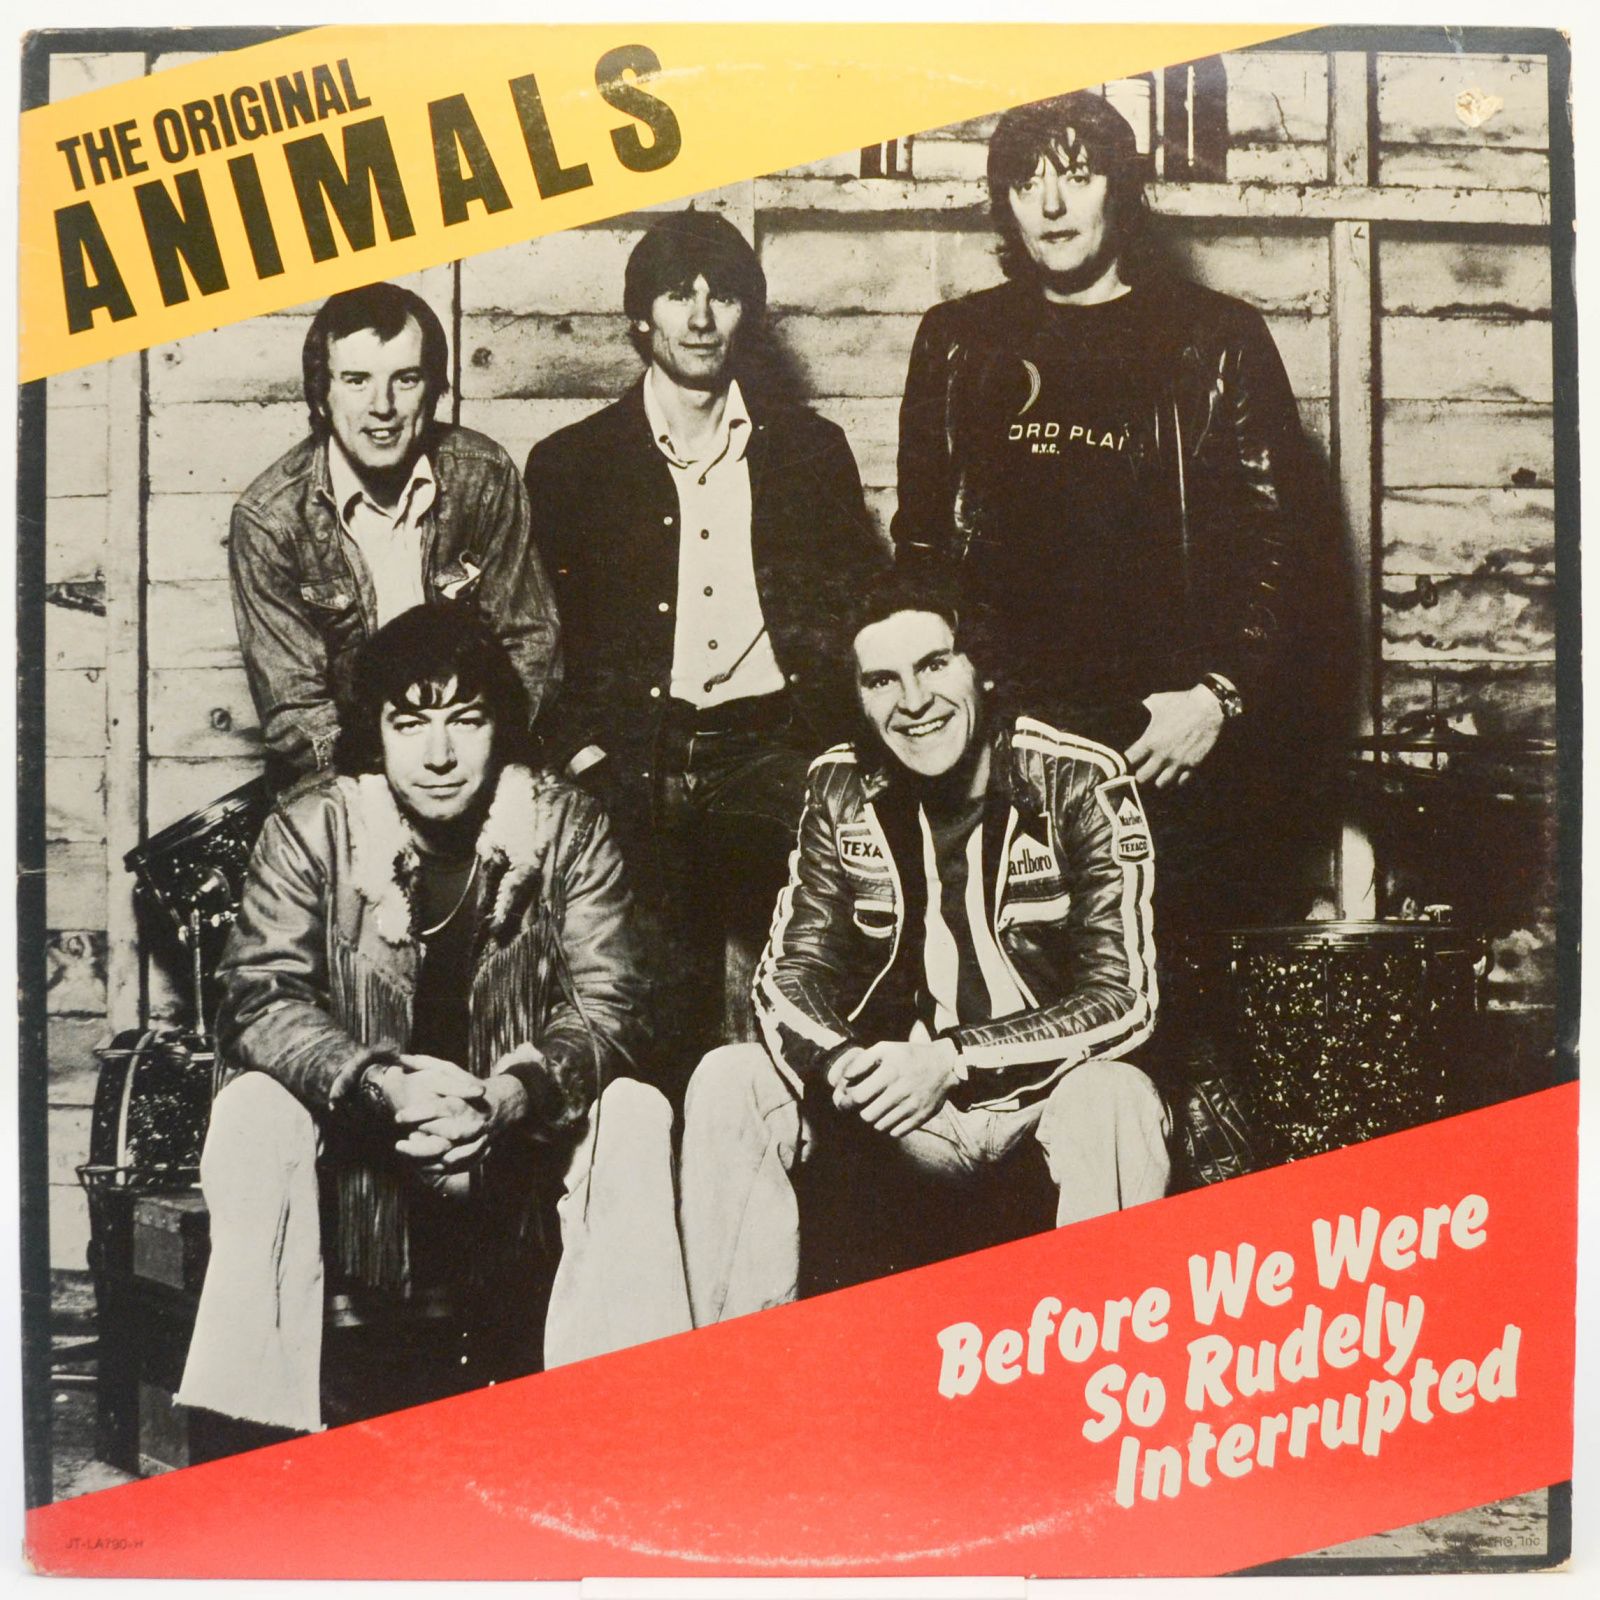 Original Animals — Before We Were So Rudely Interrupted (USA), 1977